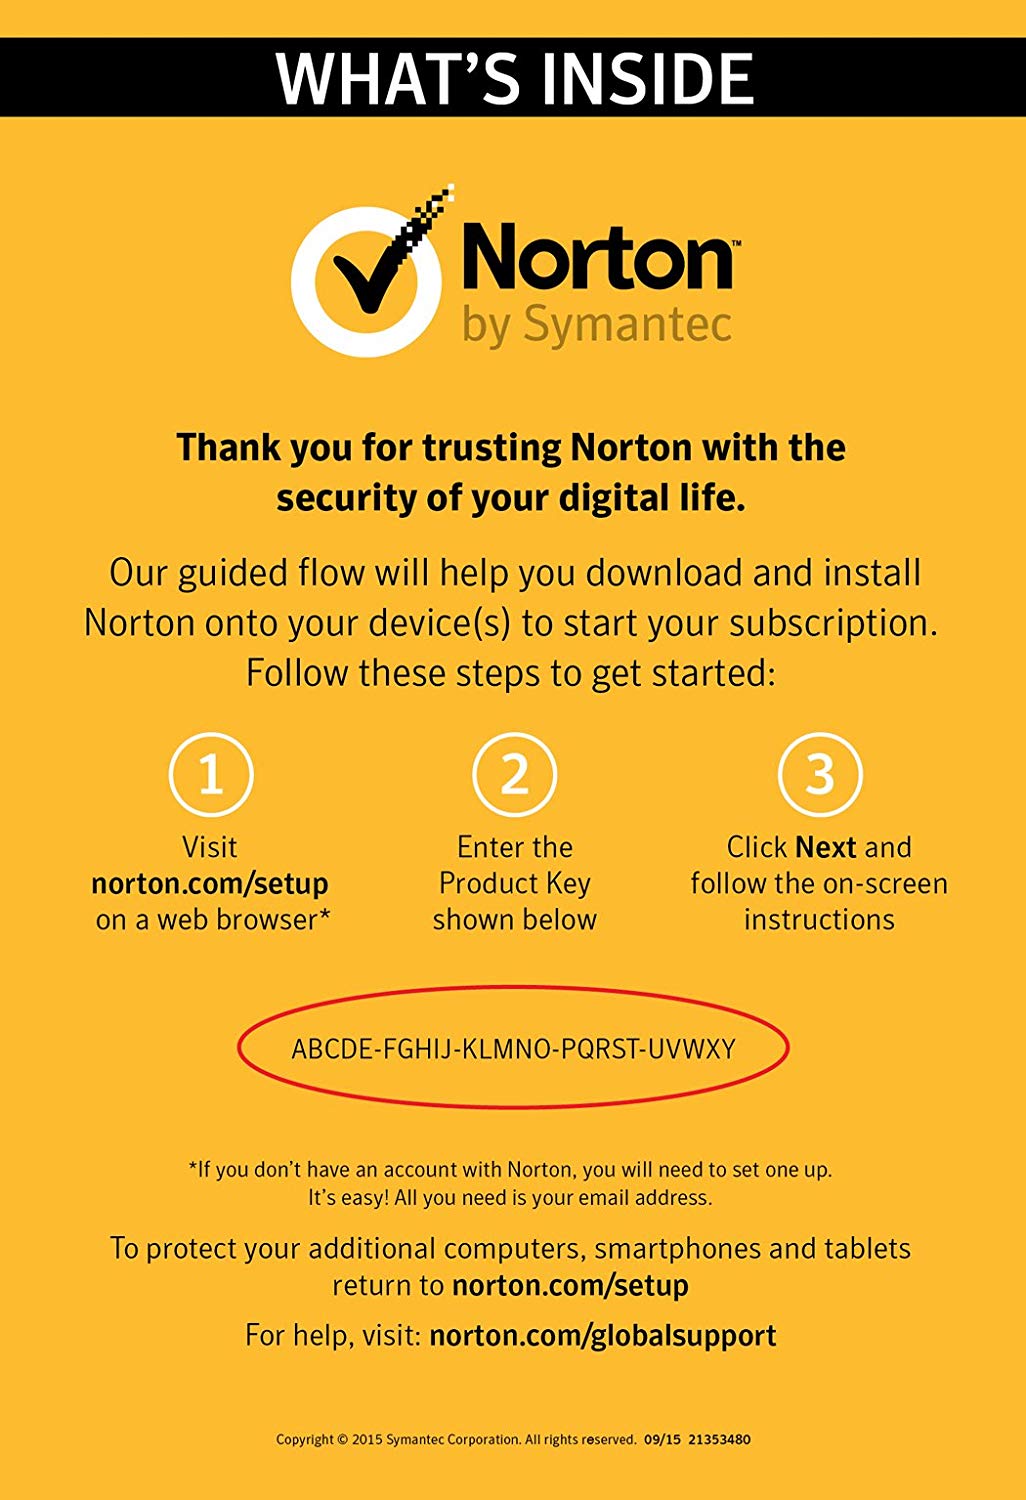 Get back your product key to get started with Norton